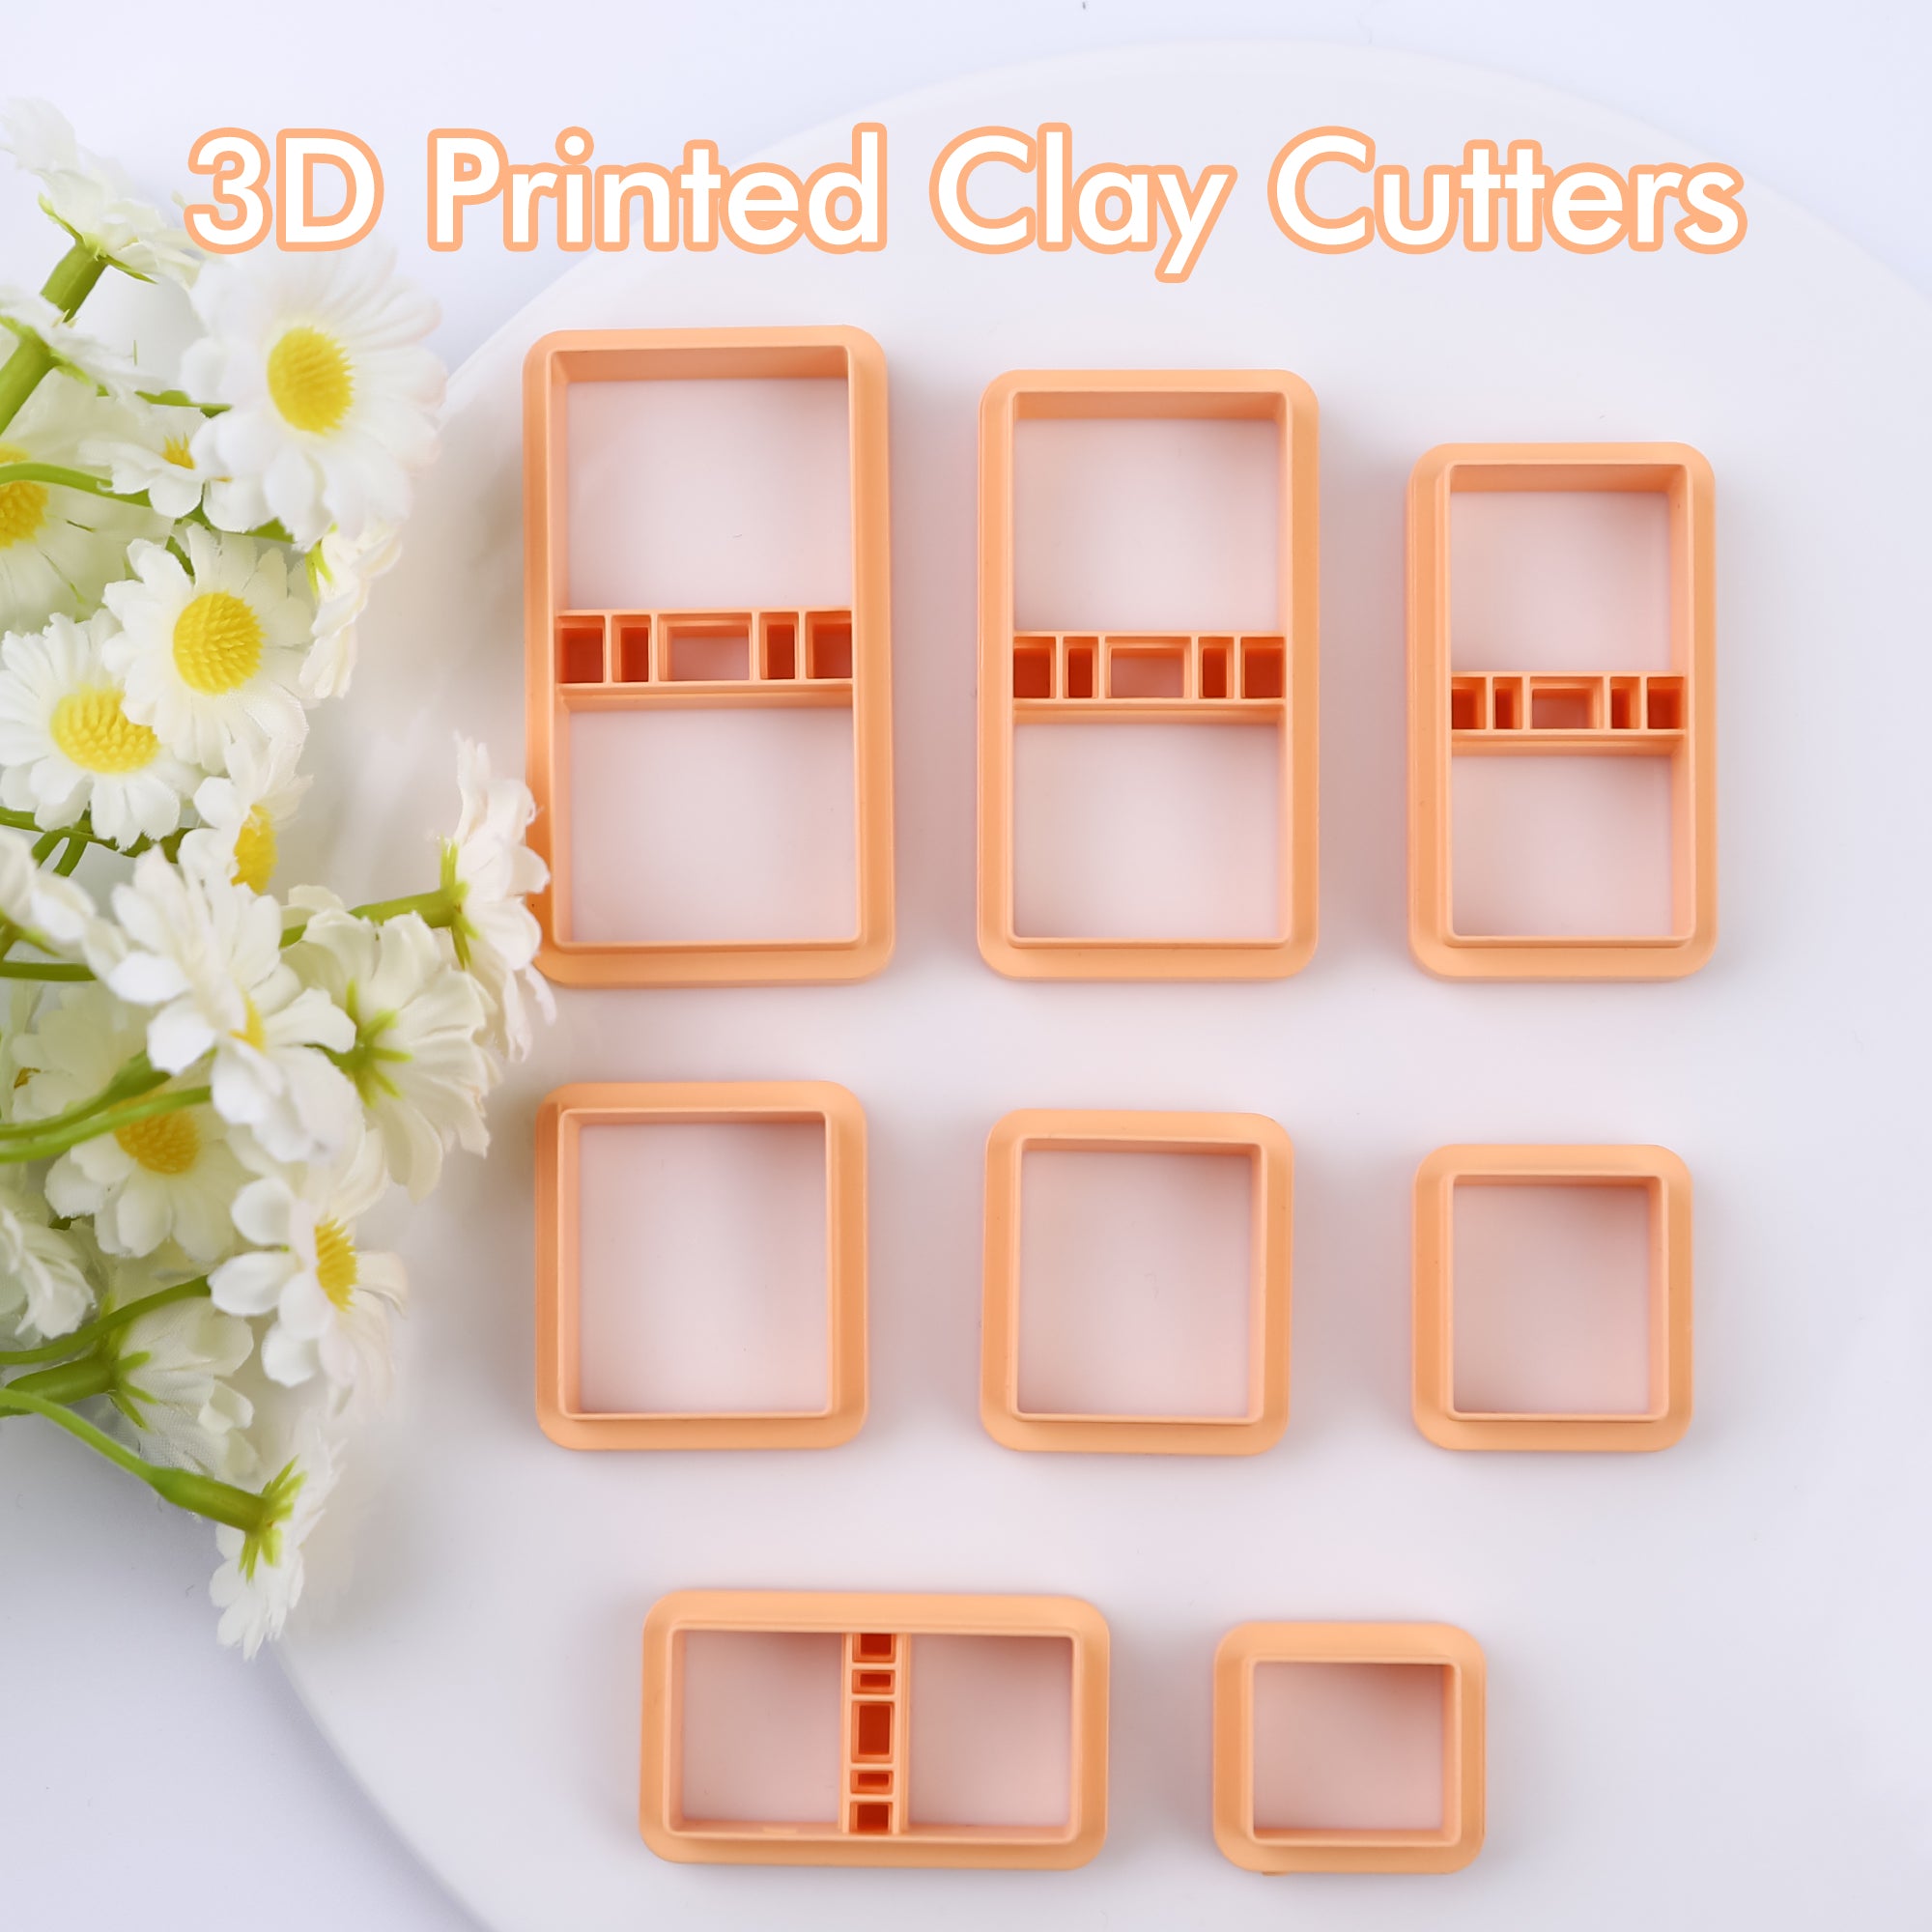 Puocaon Books Clay Cutters 8 Pcs